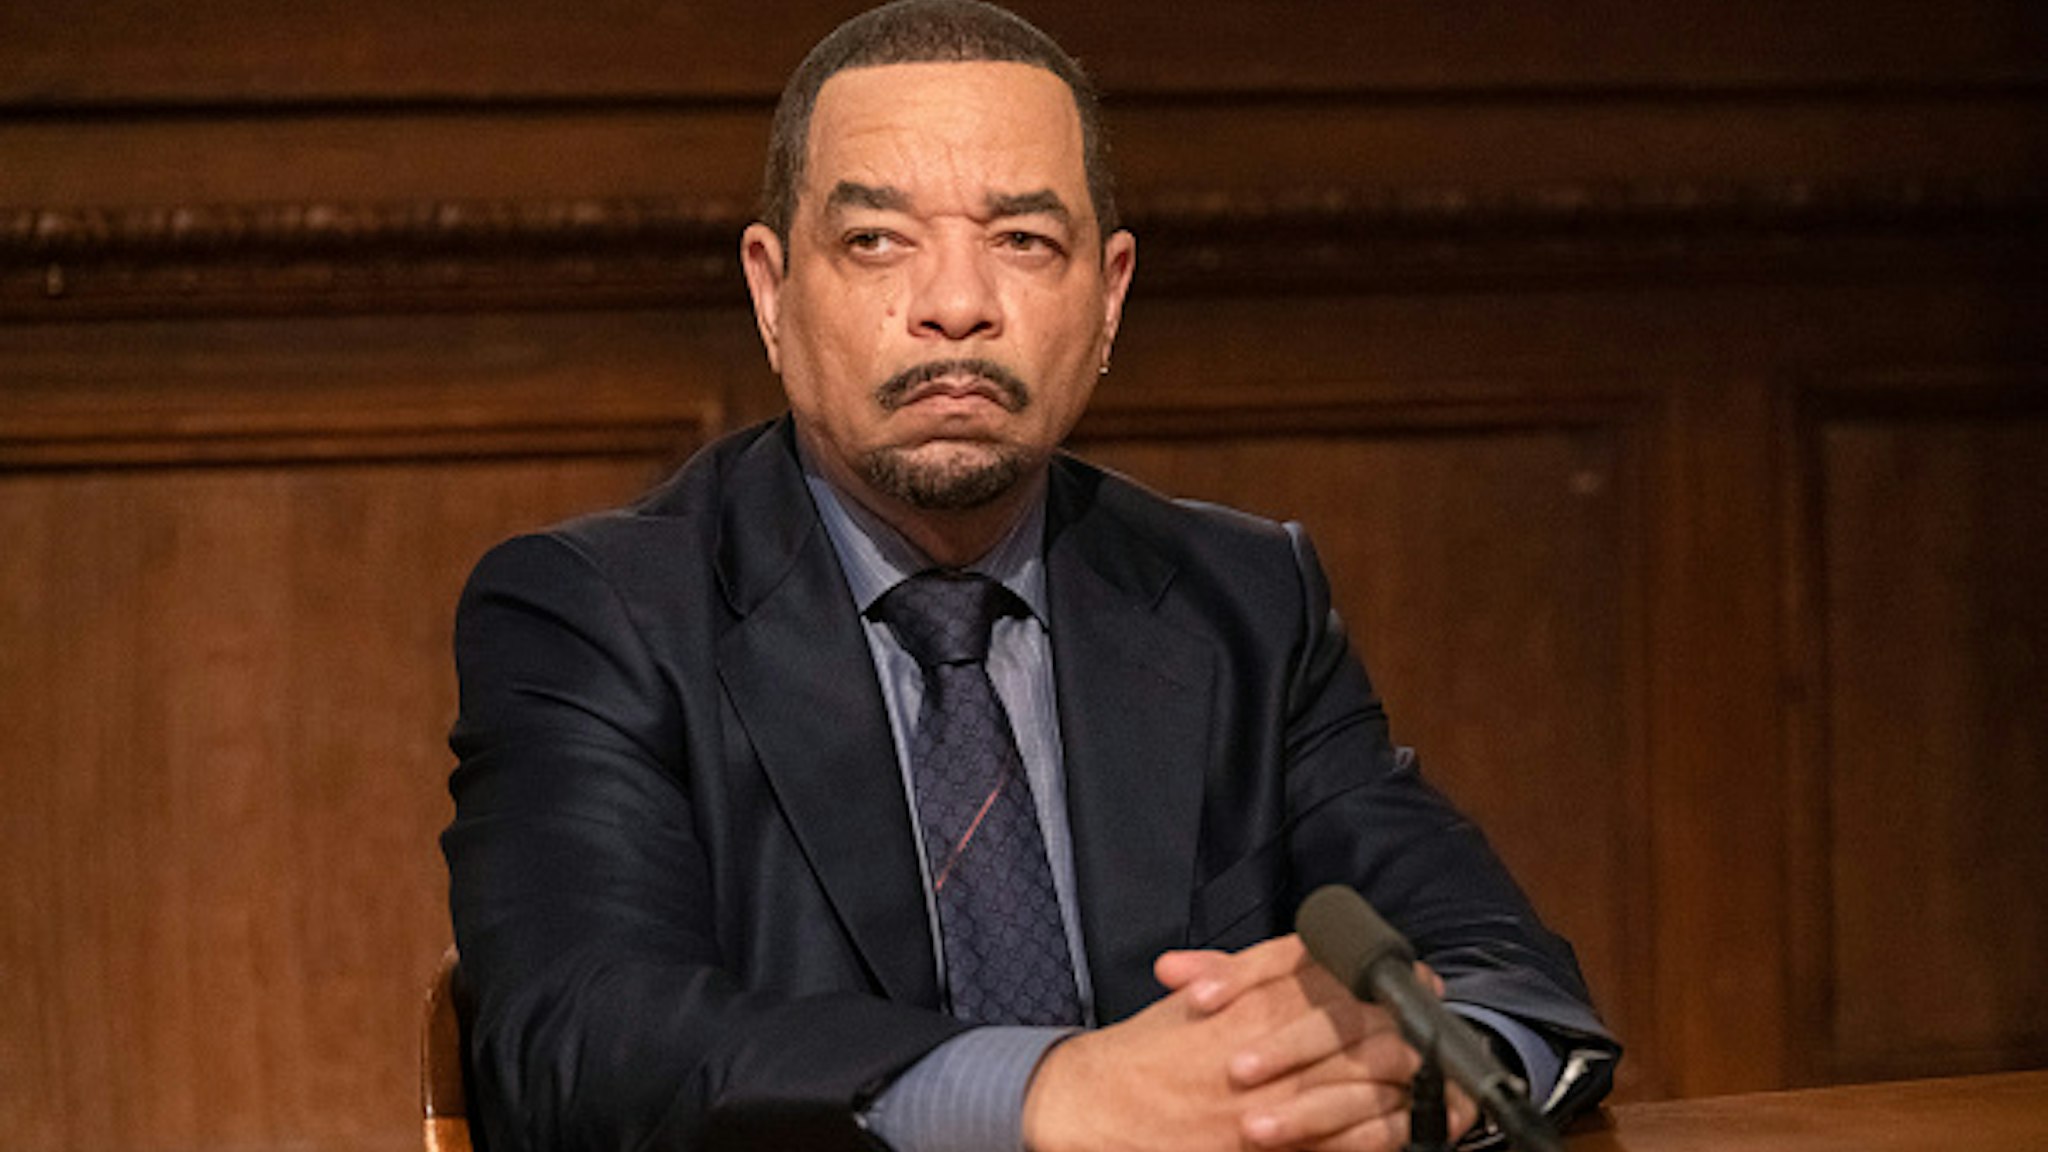 LAW &amp; ORDER: SPECIAL VICTIMS UNIT -- "Guardians and Gladiators" Episode 22003 -- Pictured: Ice T as Detective Odafin "Fin" Tutuola --